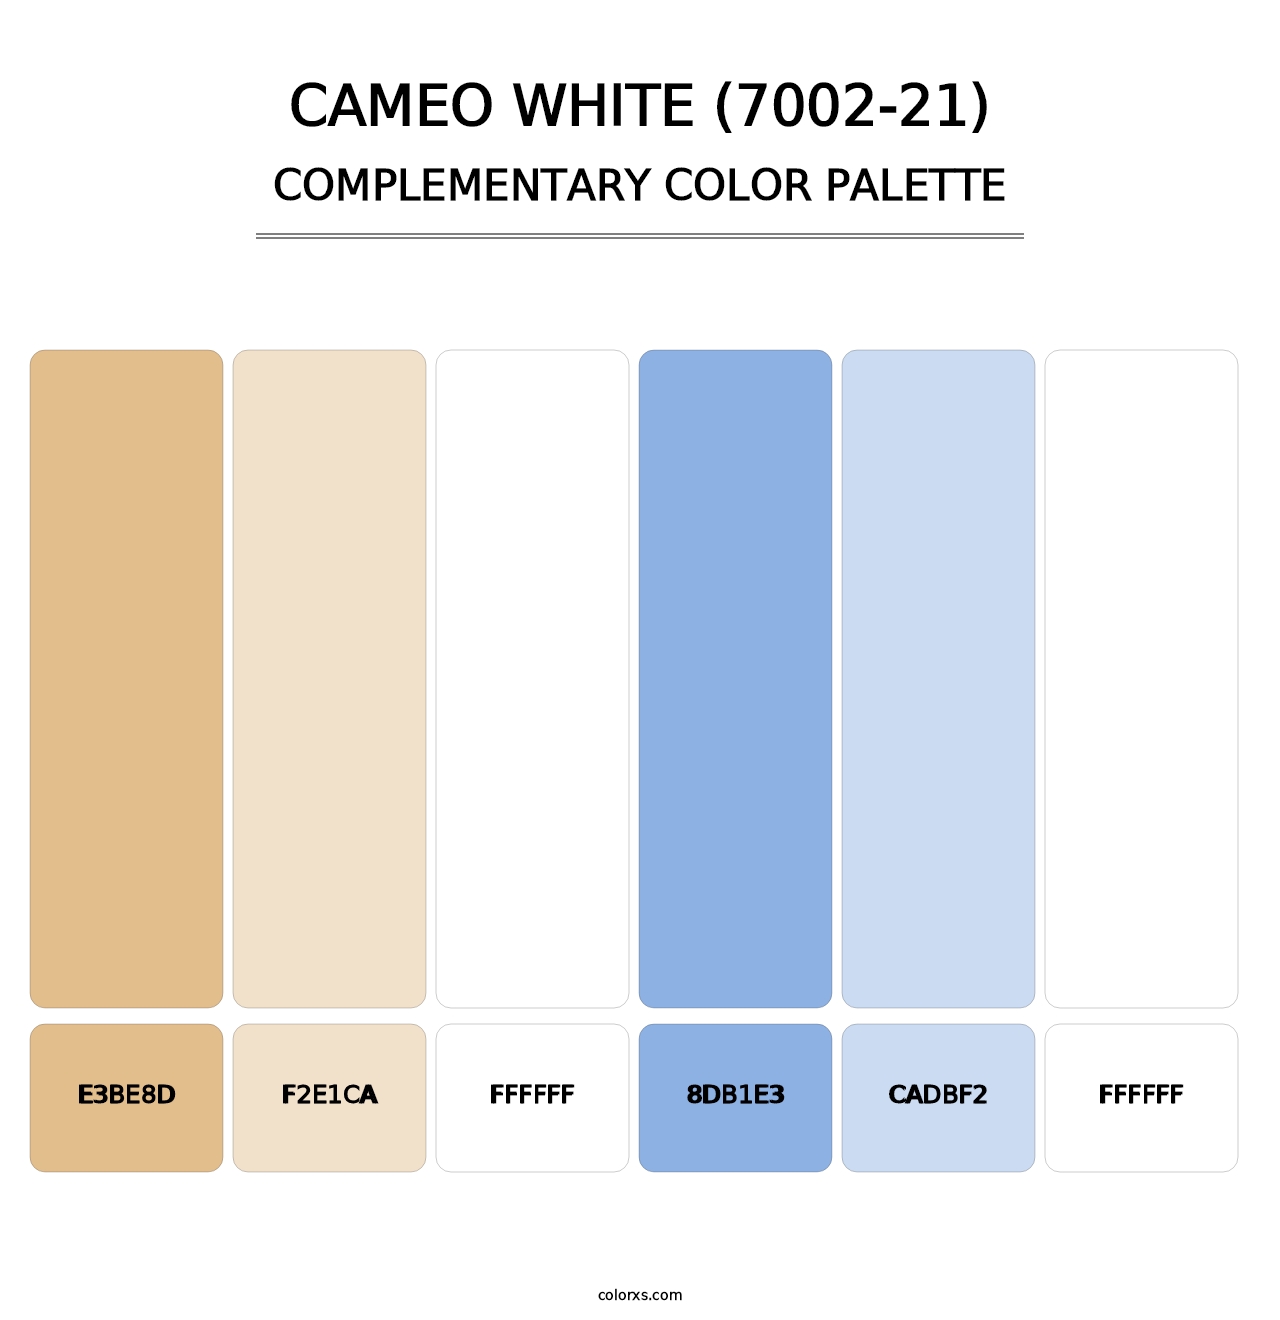 Cameo White (7002-21) - Complementary Color Palette